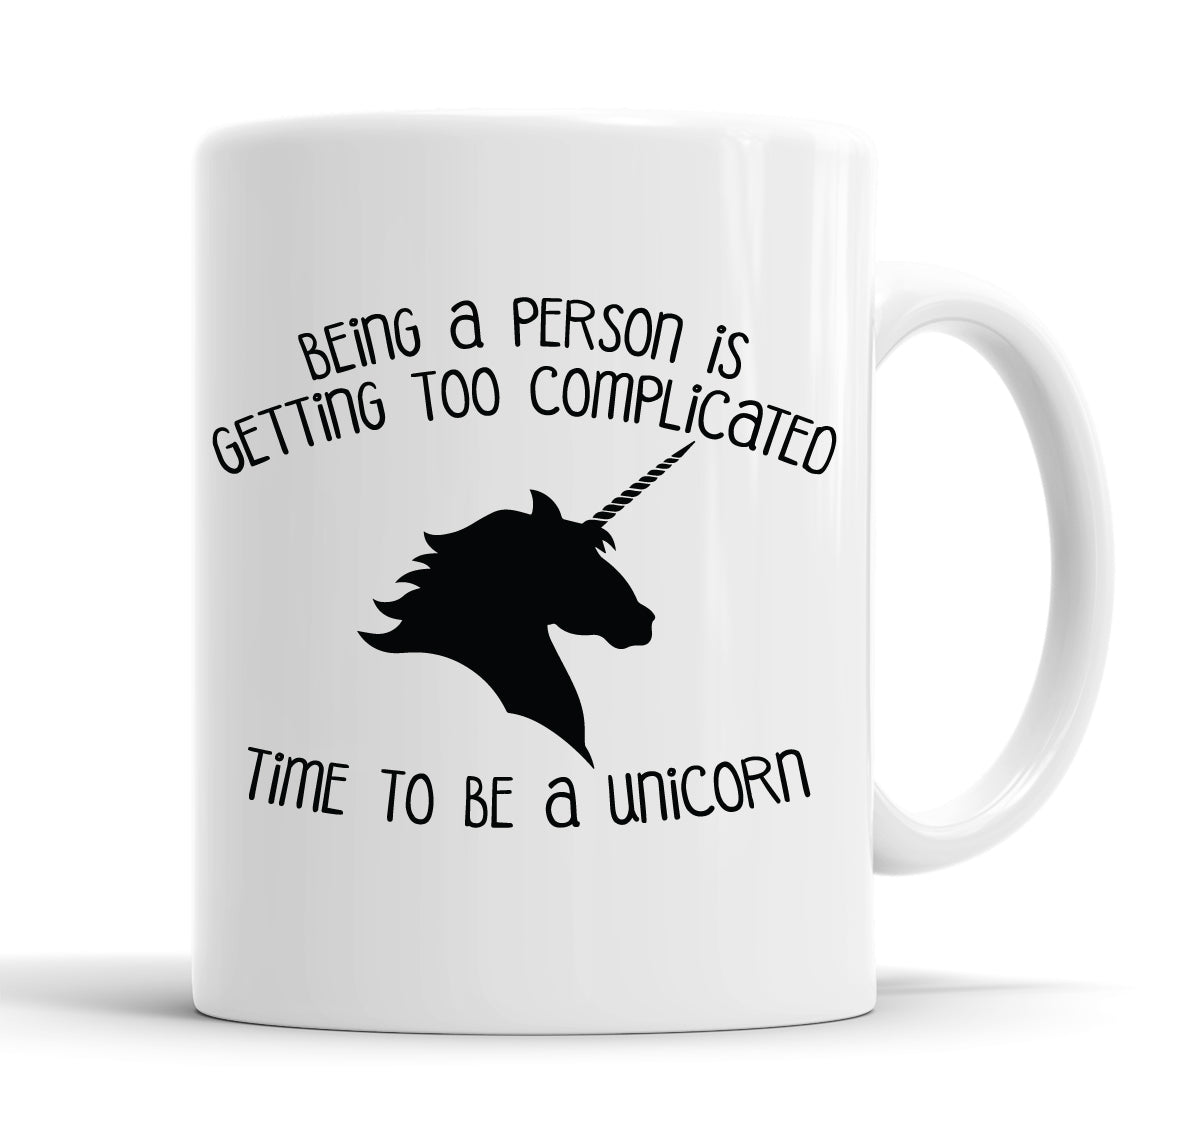 Being A Person Is Getting Too Complicated, Time To Be A Unicorn Funny Slogan Mug Tea Cup Coffee